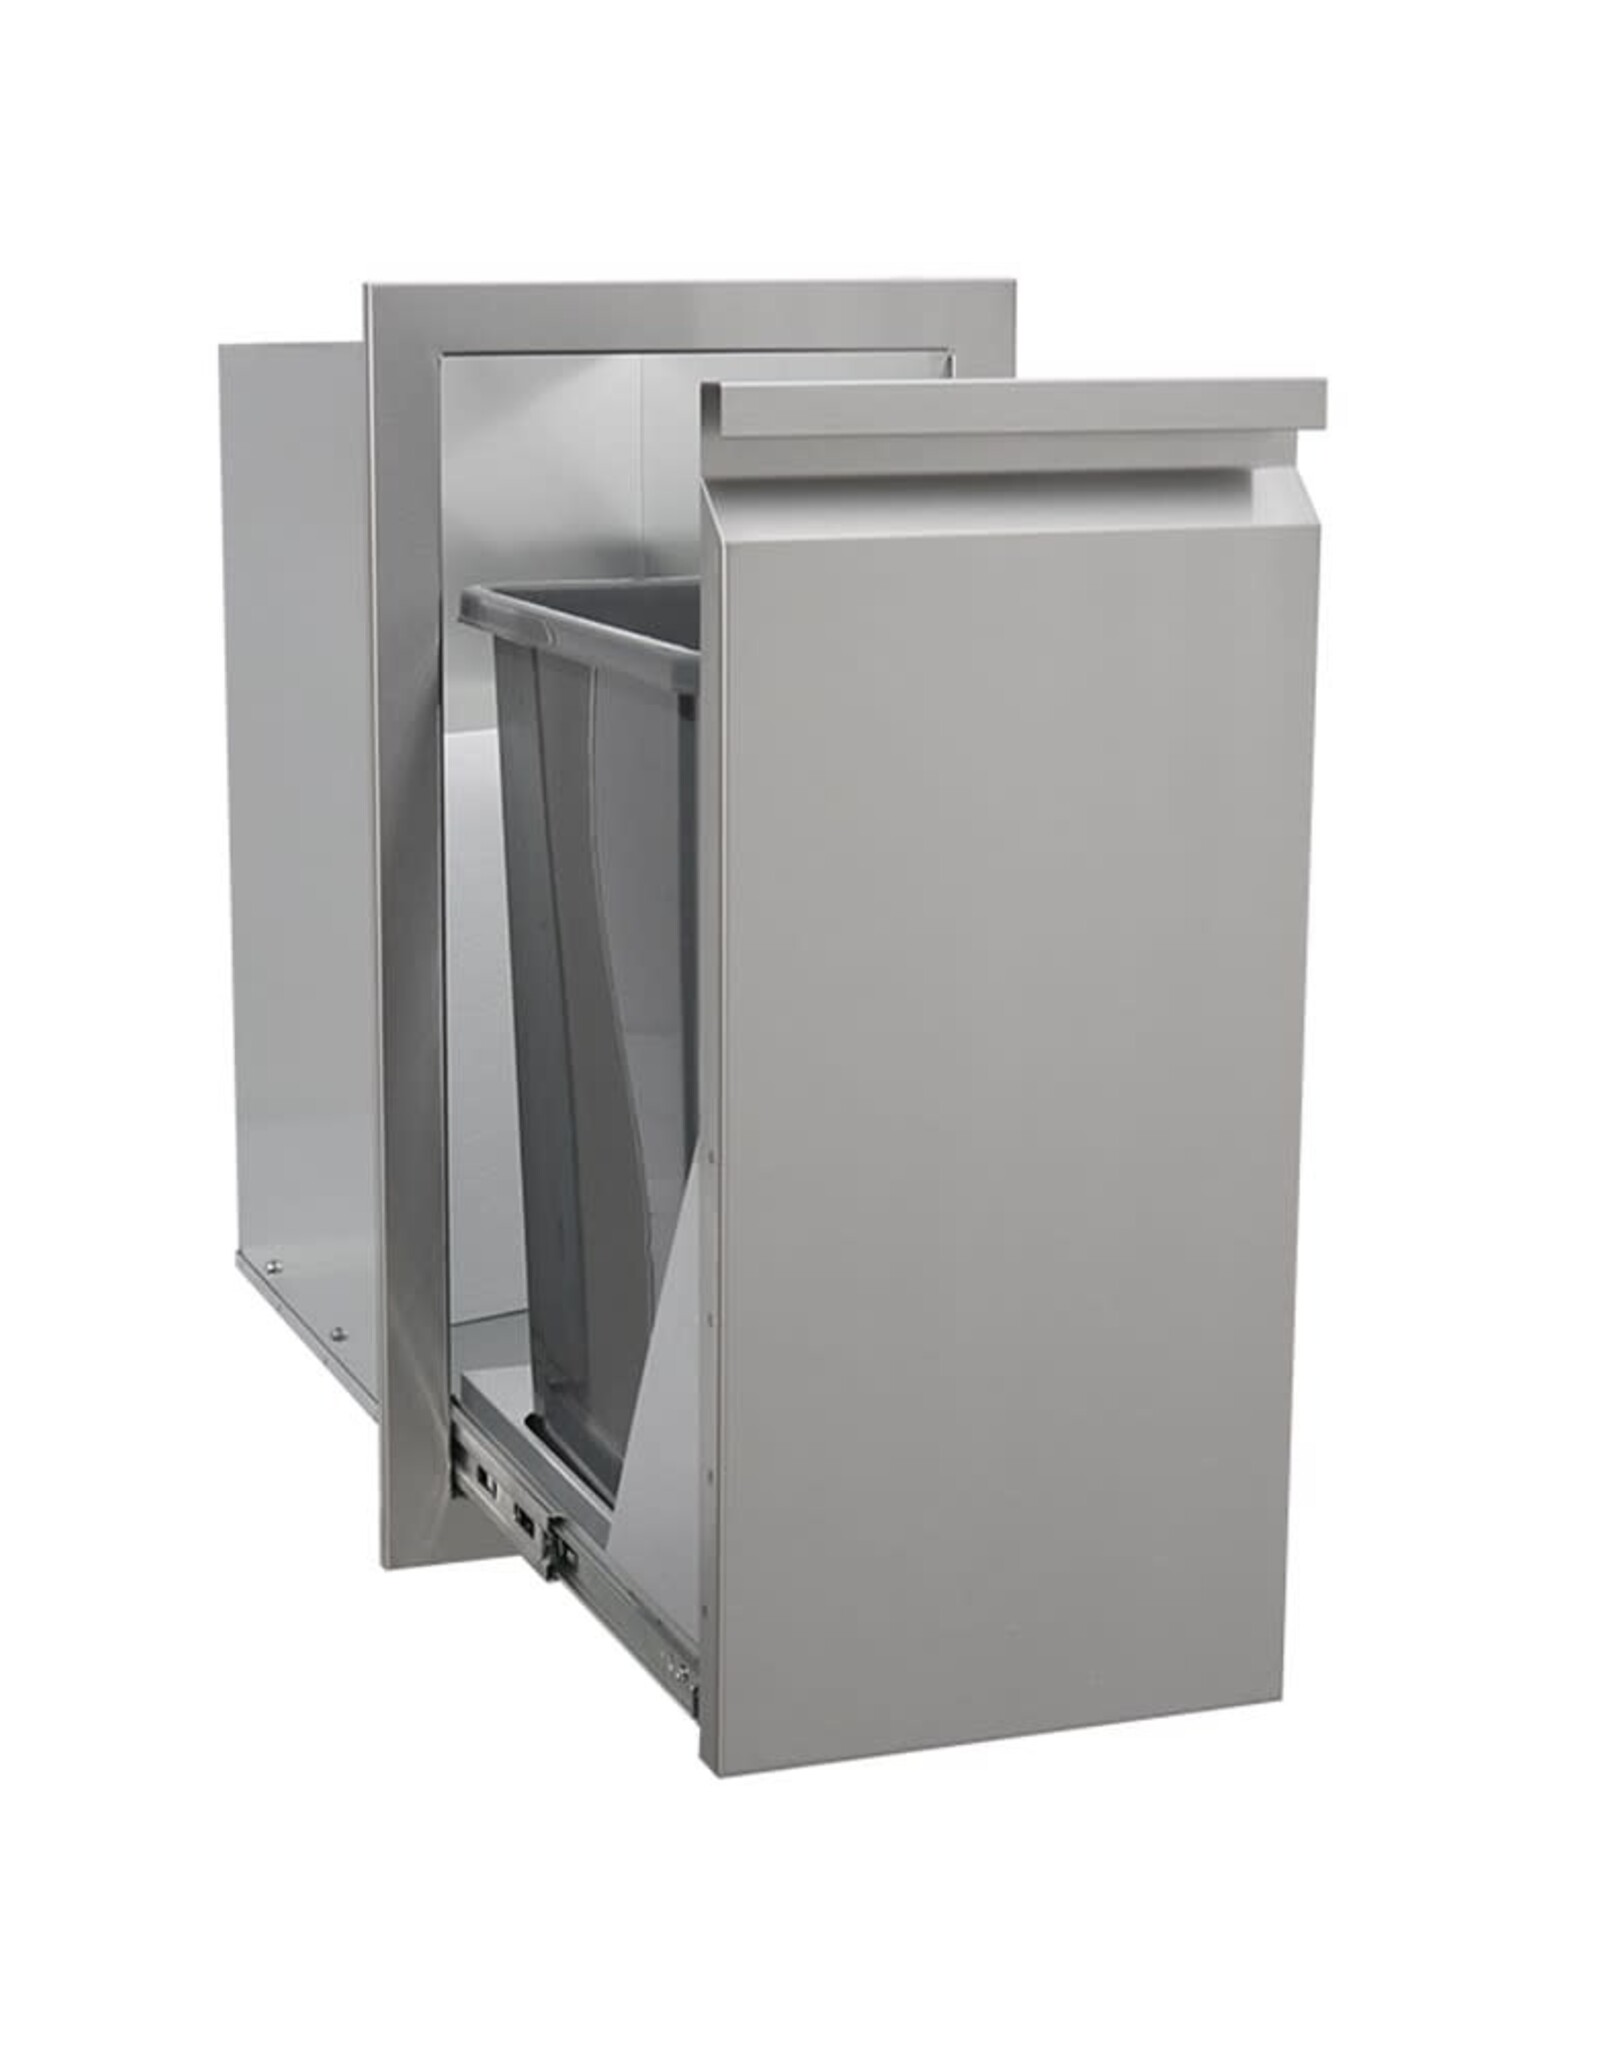 Renaissance Cooking Systems Renaissance Cooking Systems The Valiant Series Narrow Trash Drawer - VTD4